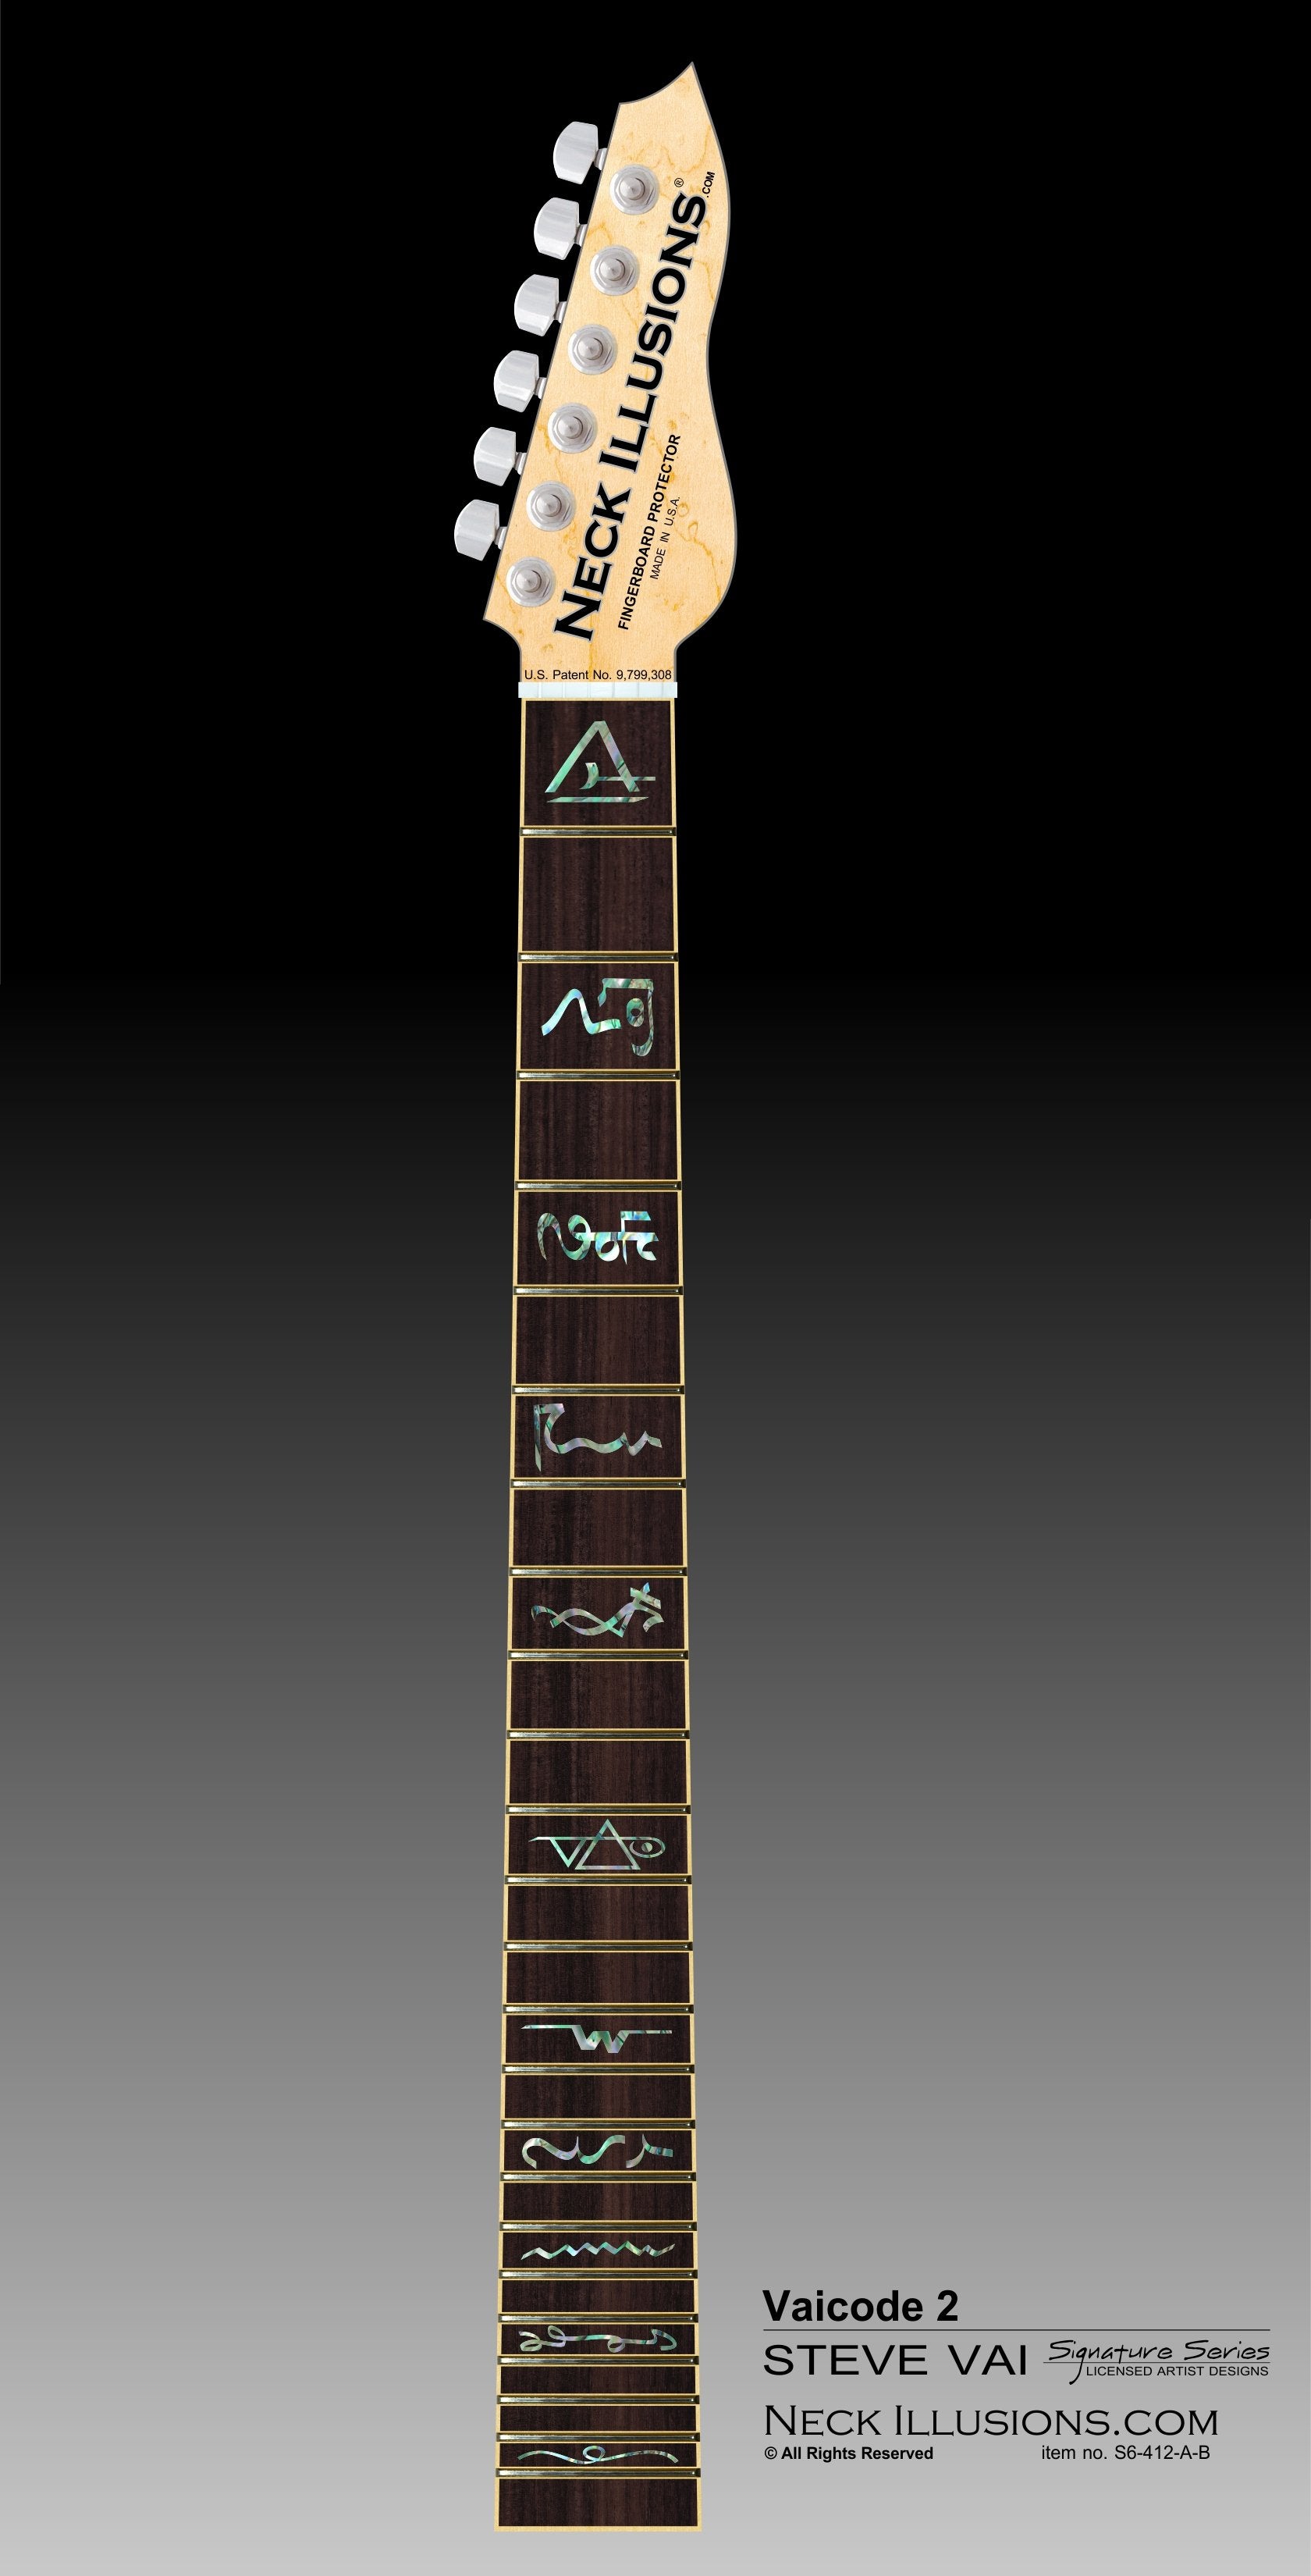  close up image of a guitar neck against a black to grey gradient background. there is a fret protector on the guitar. It is a dark wood color with blue and grey multi-color symbols on nearly every other fret. One fret has the steve vai logo on it. The steve vai logo makes the word "vai" with an upside down triangle, a right side up one, and a line going across the triangles with a curl at the end next to the triangle that is upright. 